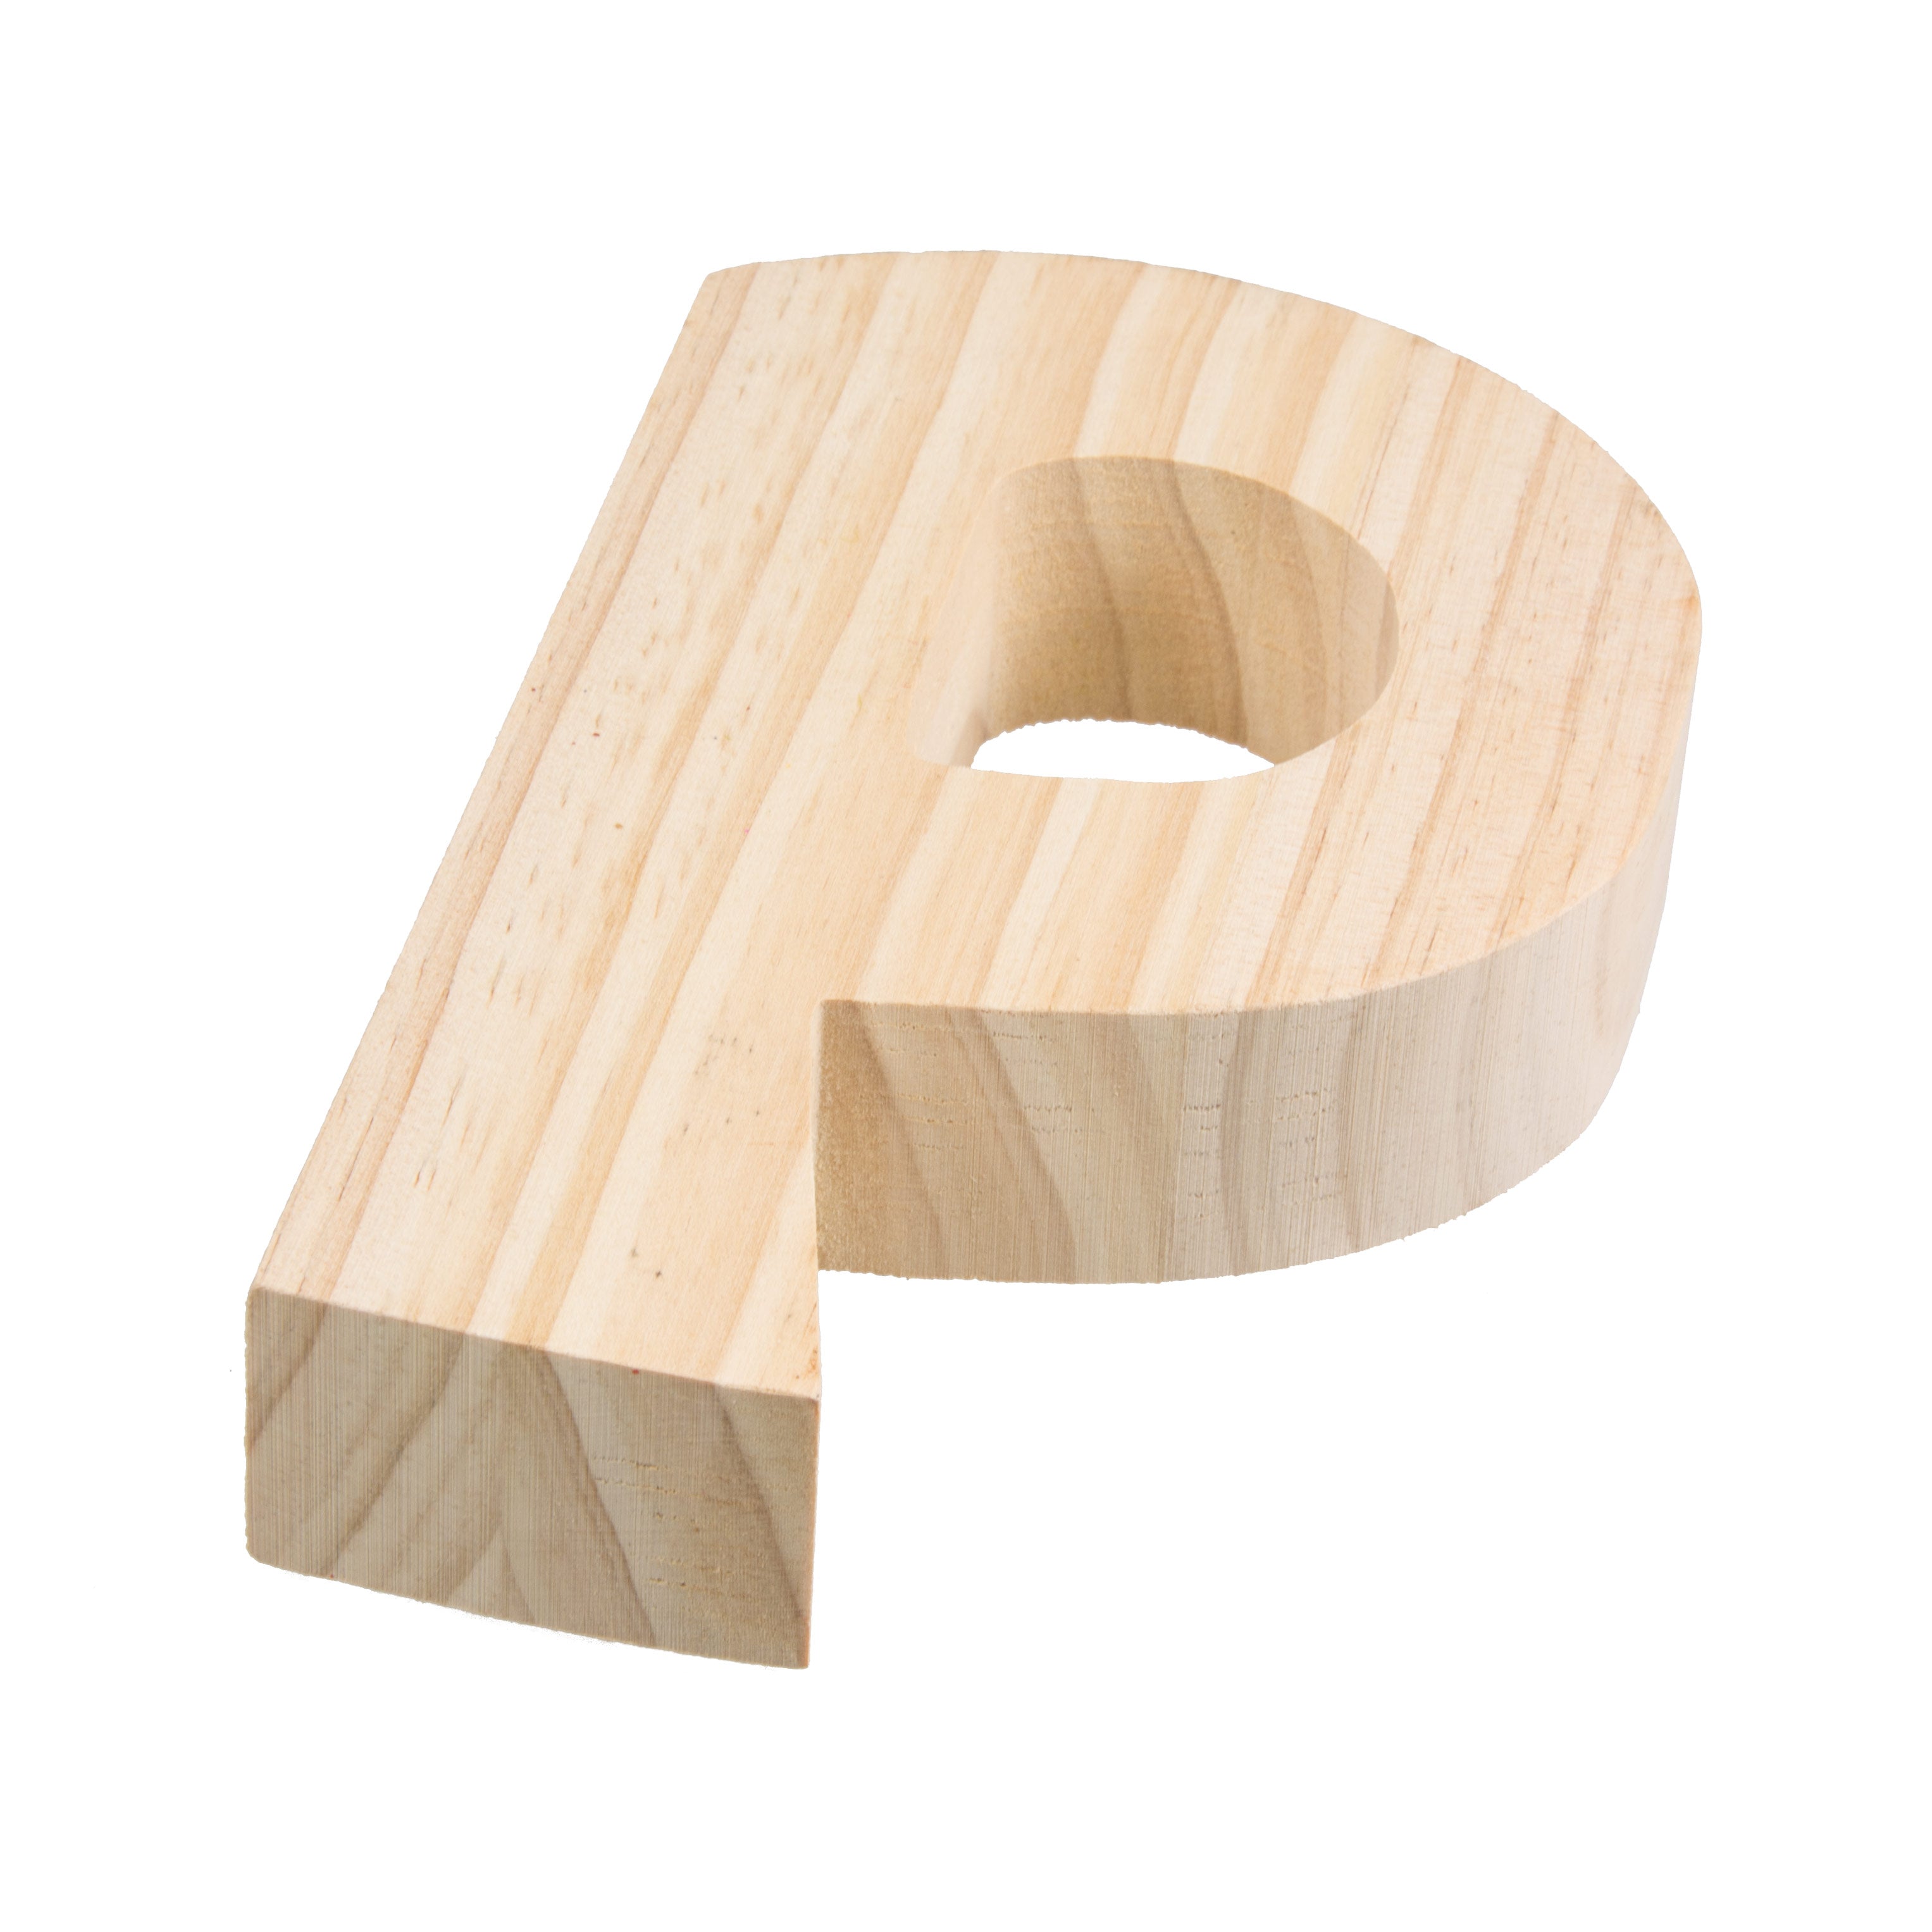 7.75" Chunky Wooden Letter: P